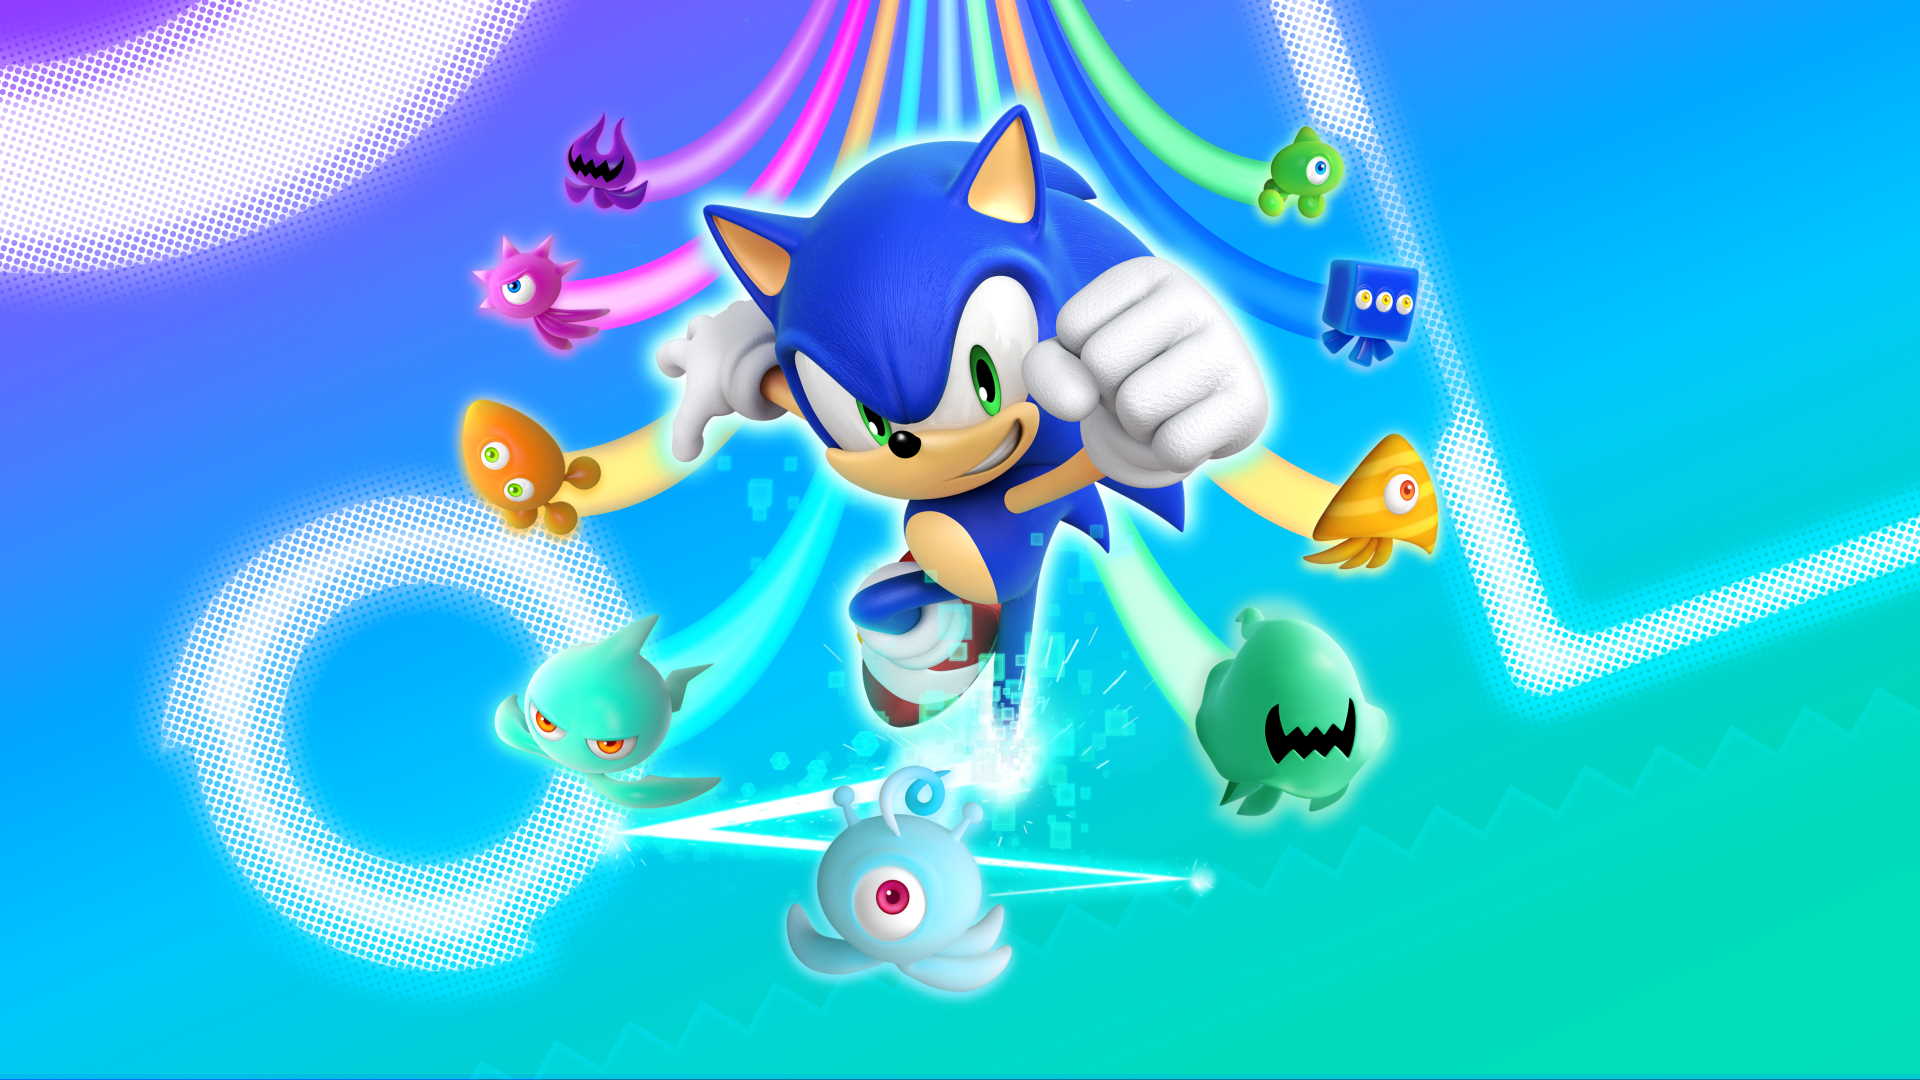 Preview: 'Sonic Mania' is the lost Sonic game you always wanted